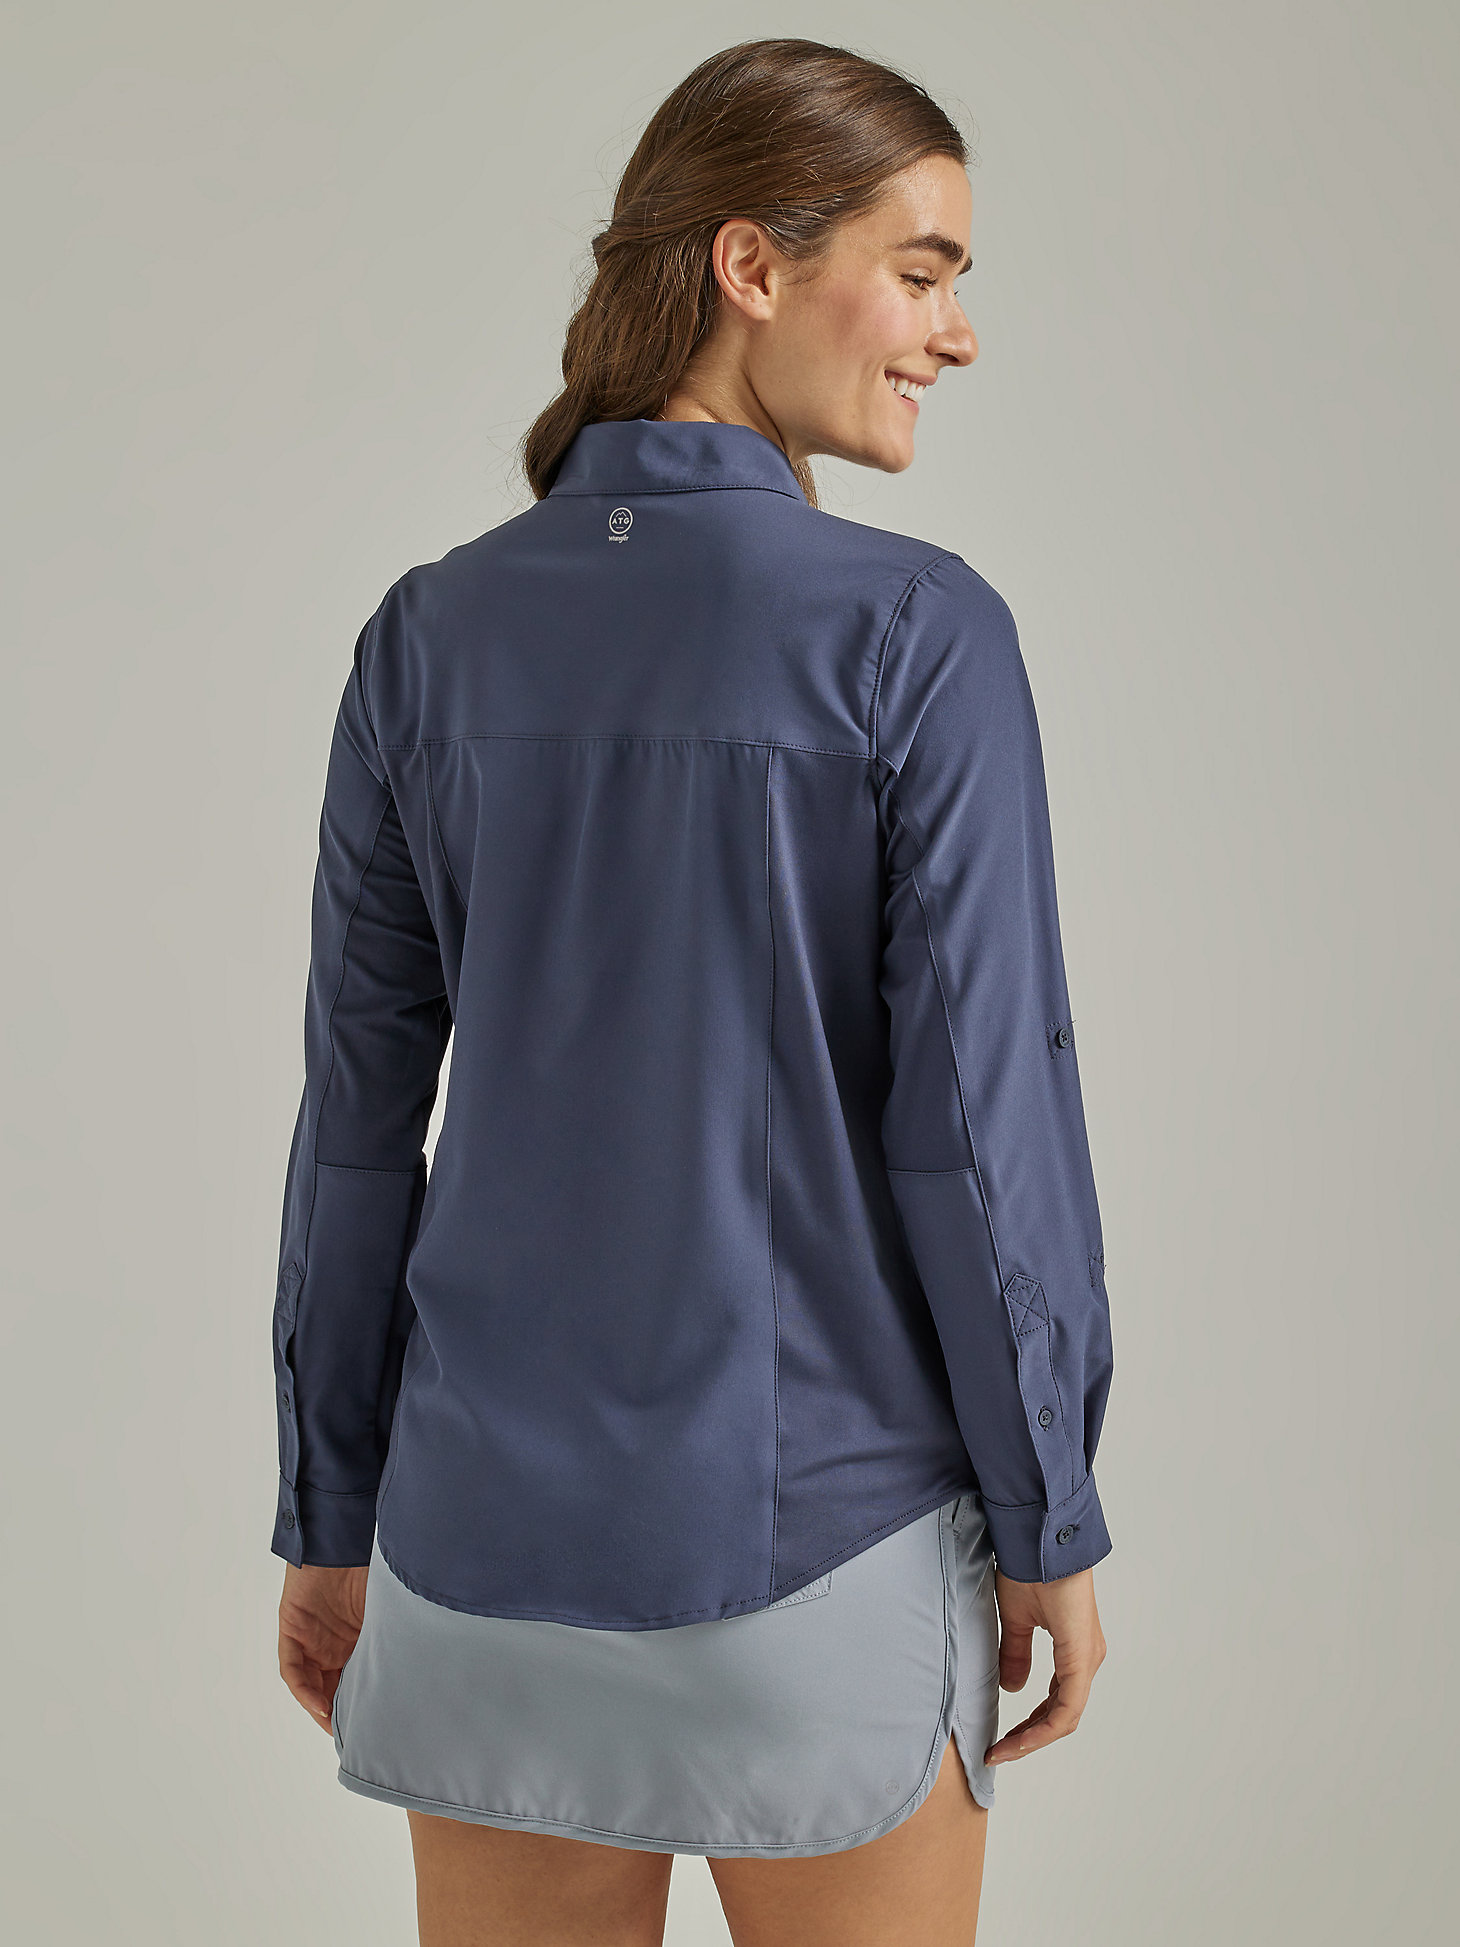 ATG By Wrangler® Women's Trail Shirt in Blue Nights alternative view 1